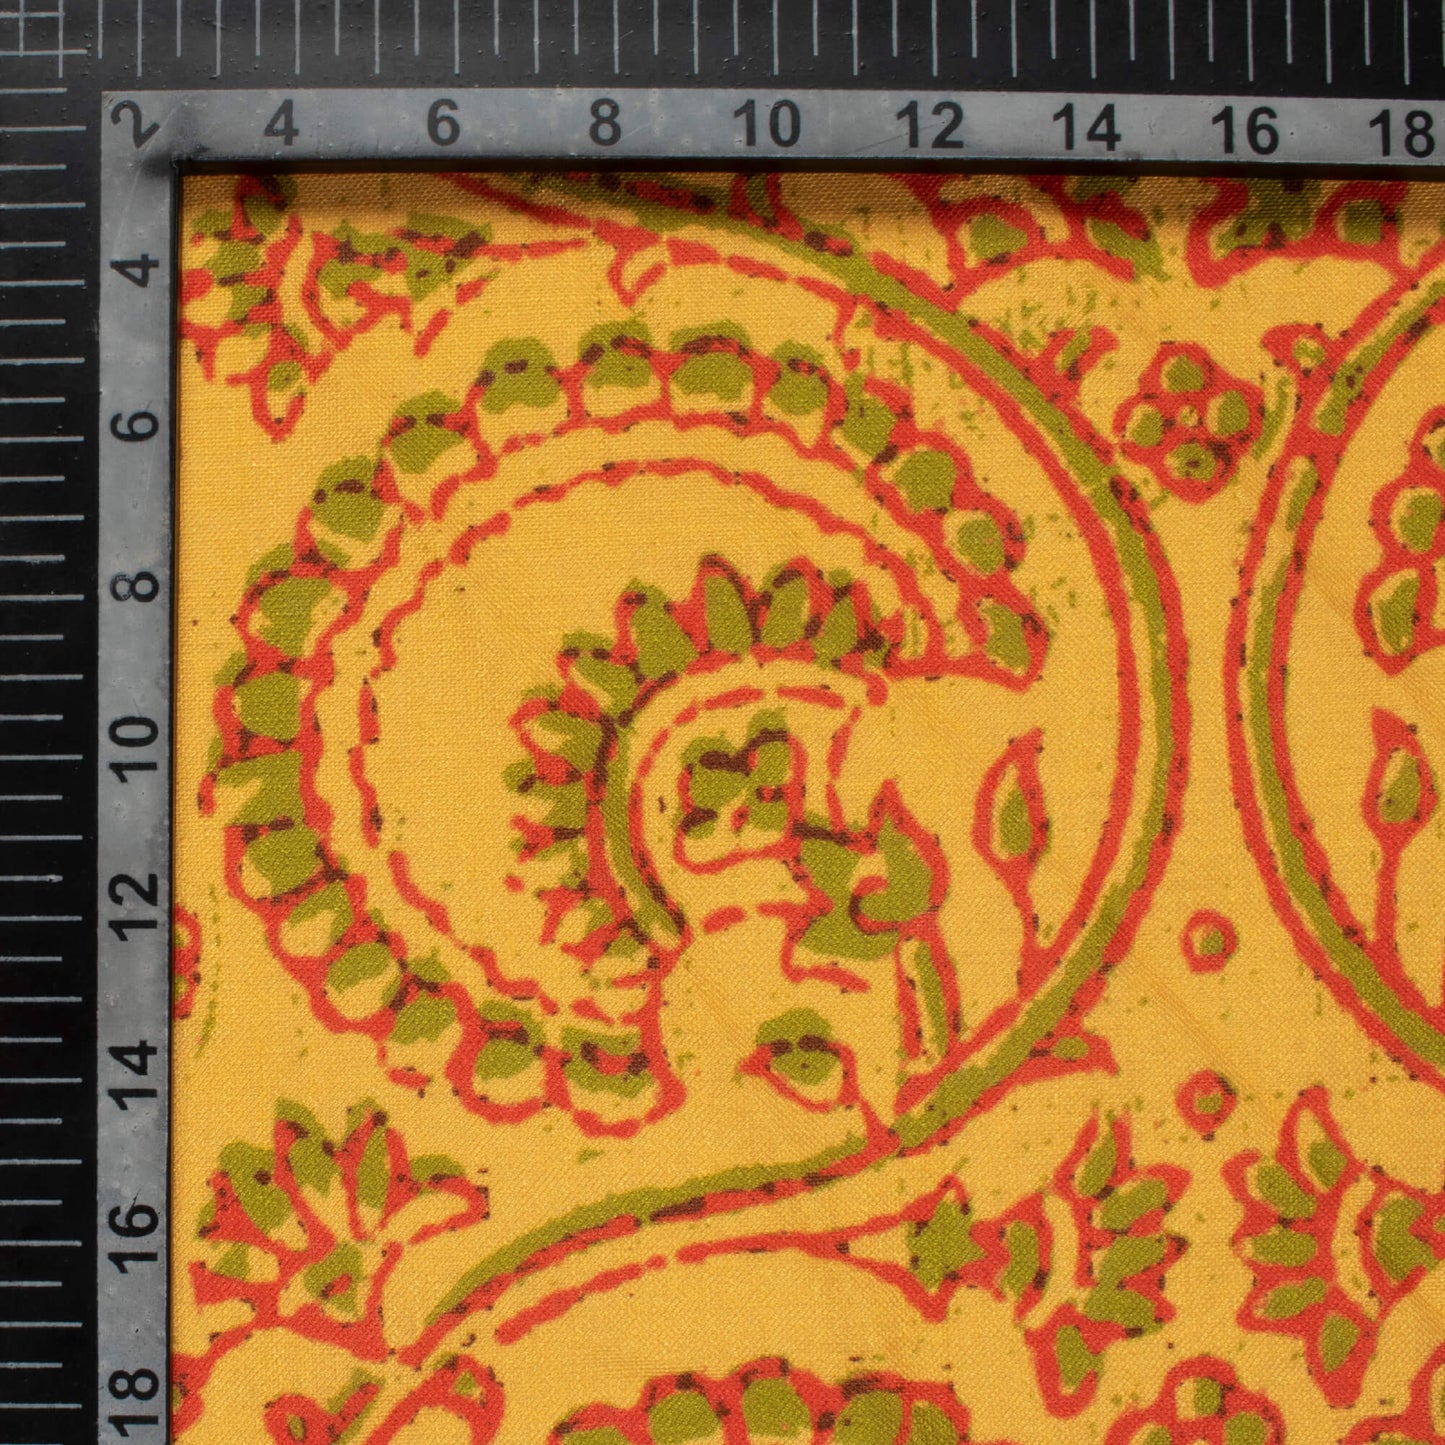 Goldenrod Yellow And Red Floral Pattern Digital Print Linen Textured Fabric (Width 56 Inches)